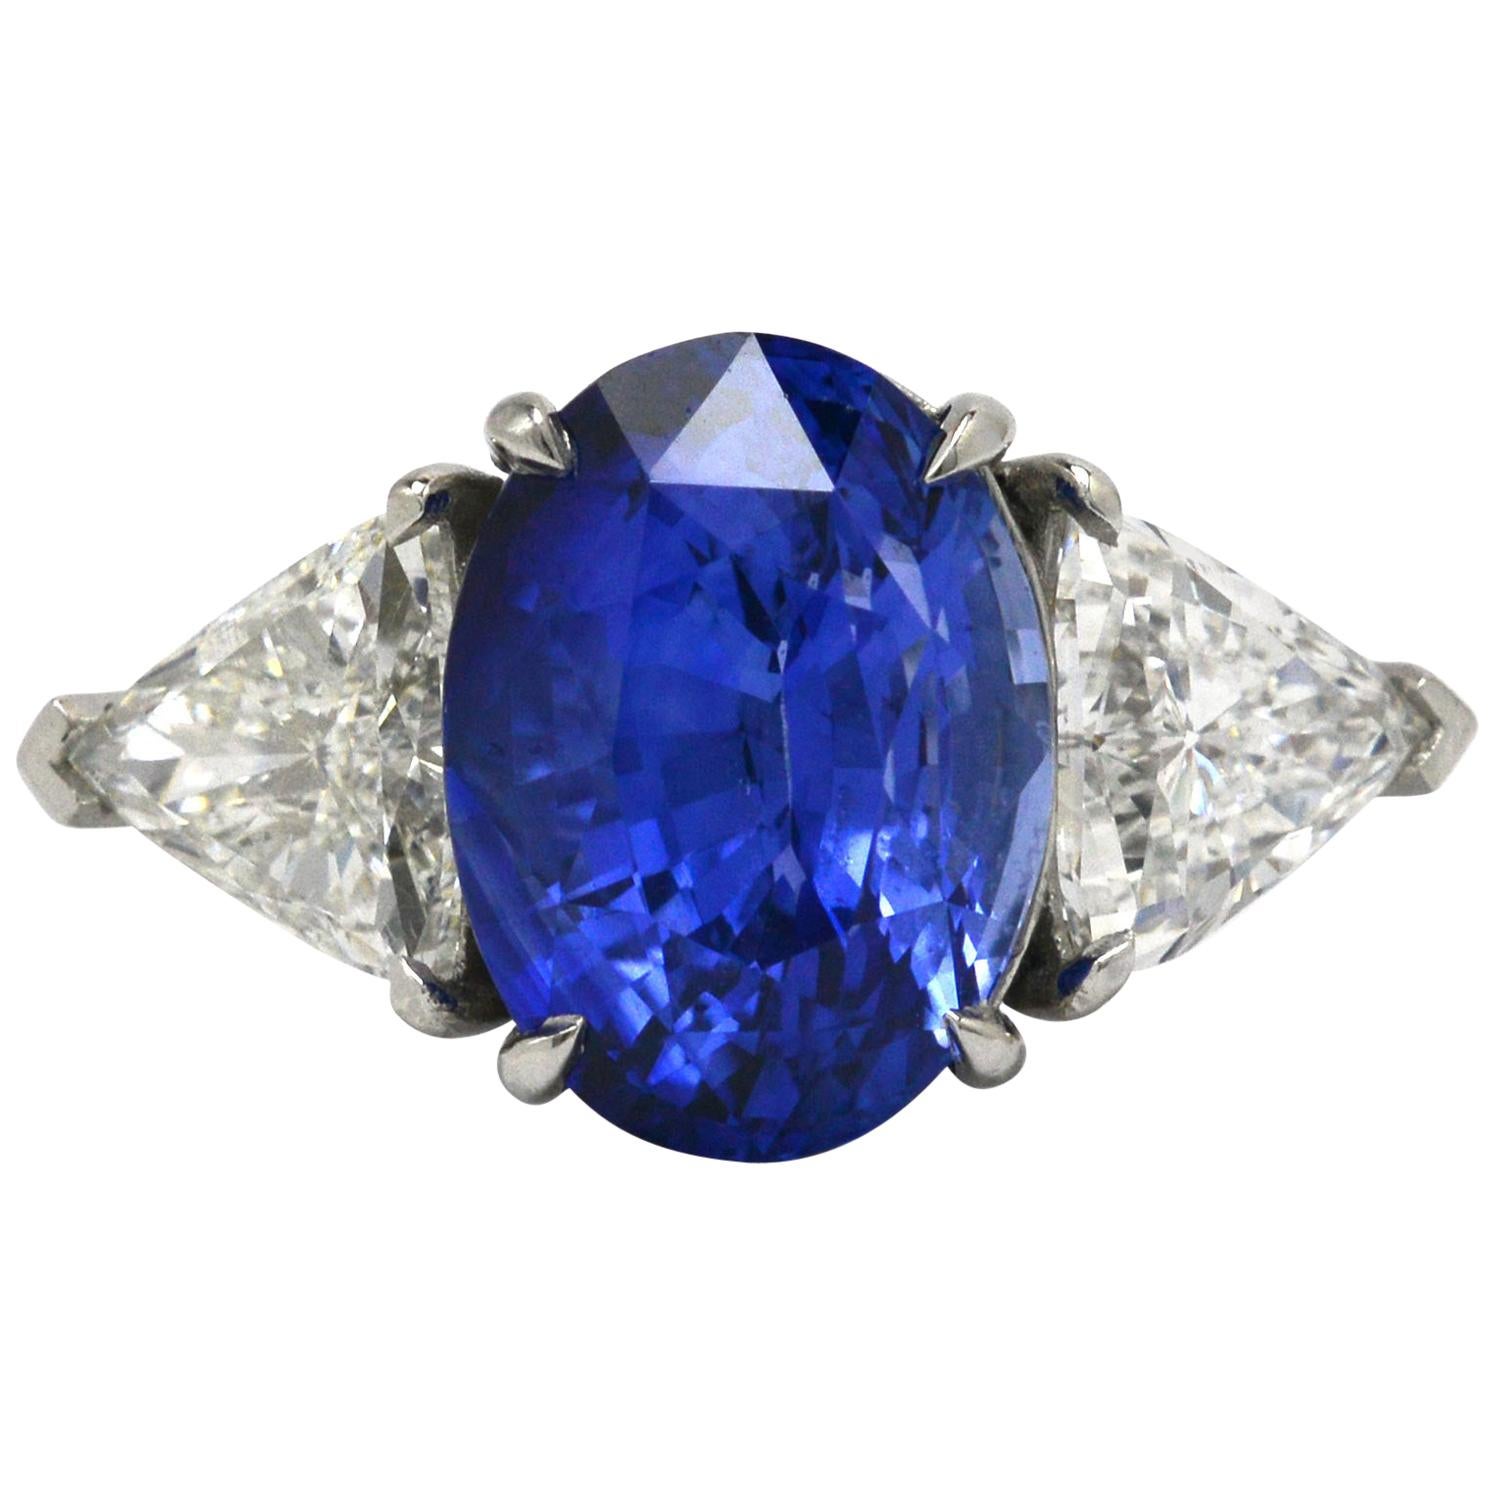 Important Blue Sapphire 3-Stone Engagement Ring Triangle Diamonds 9 Carats Total